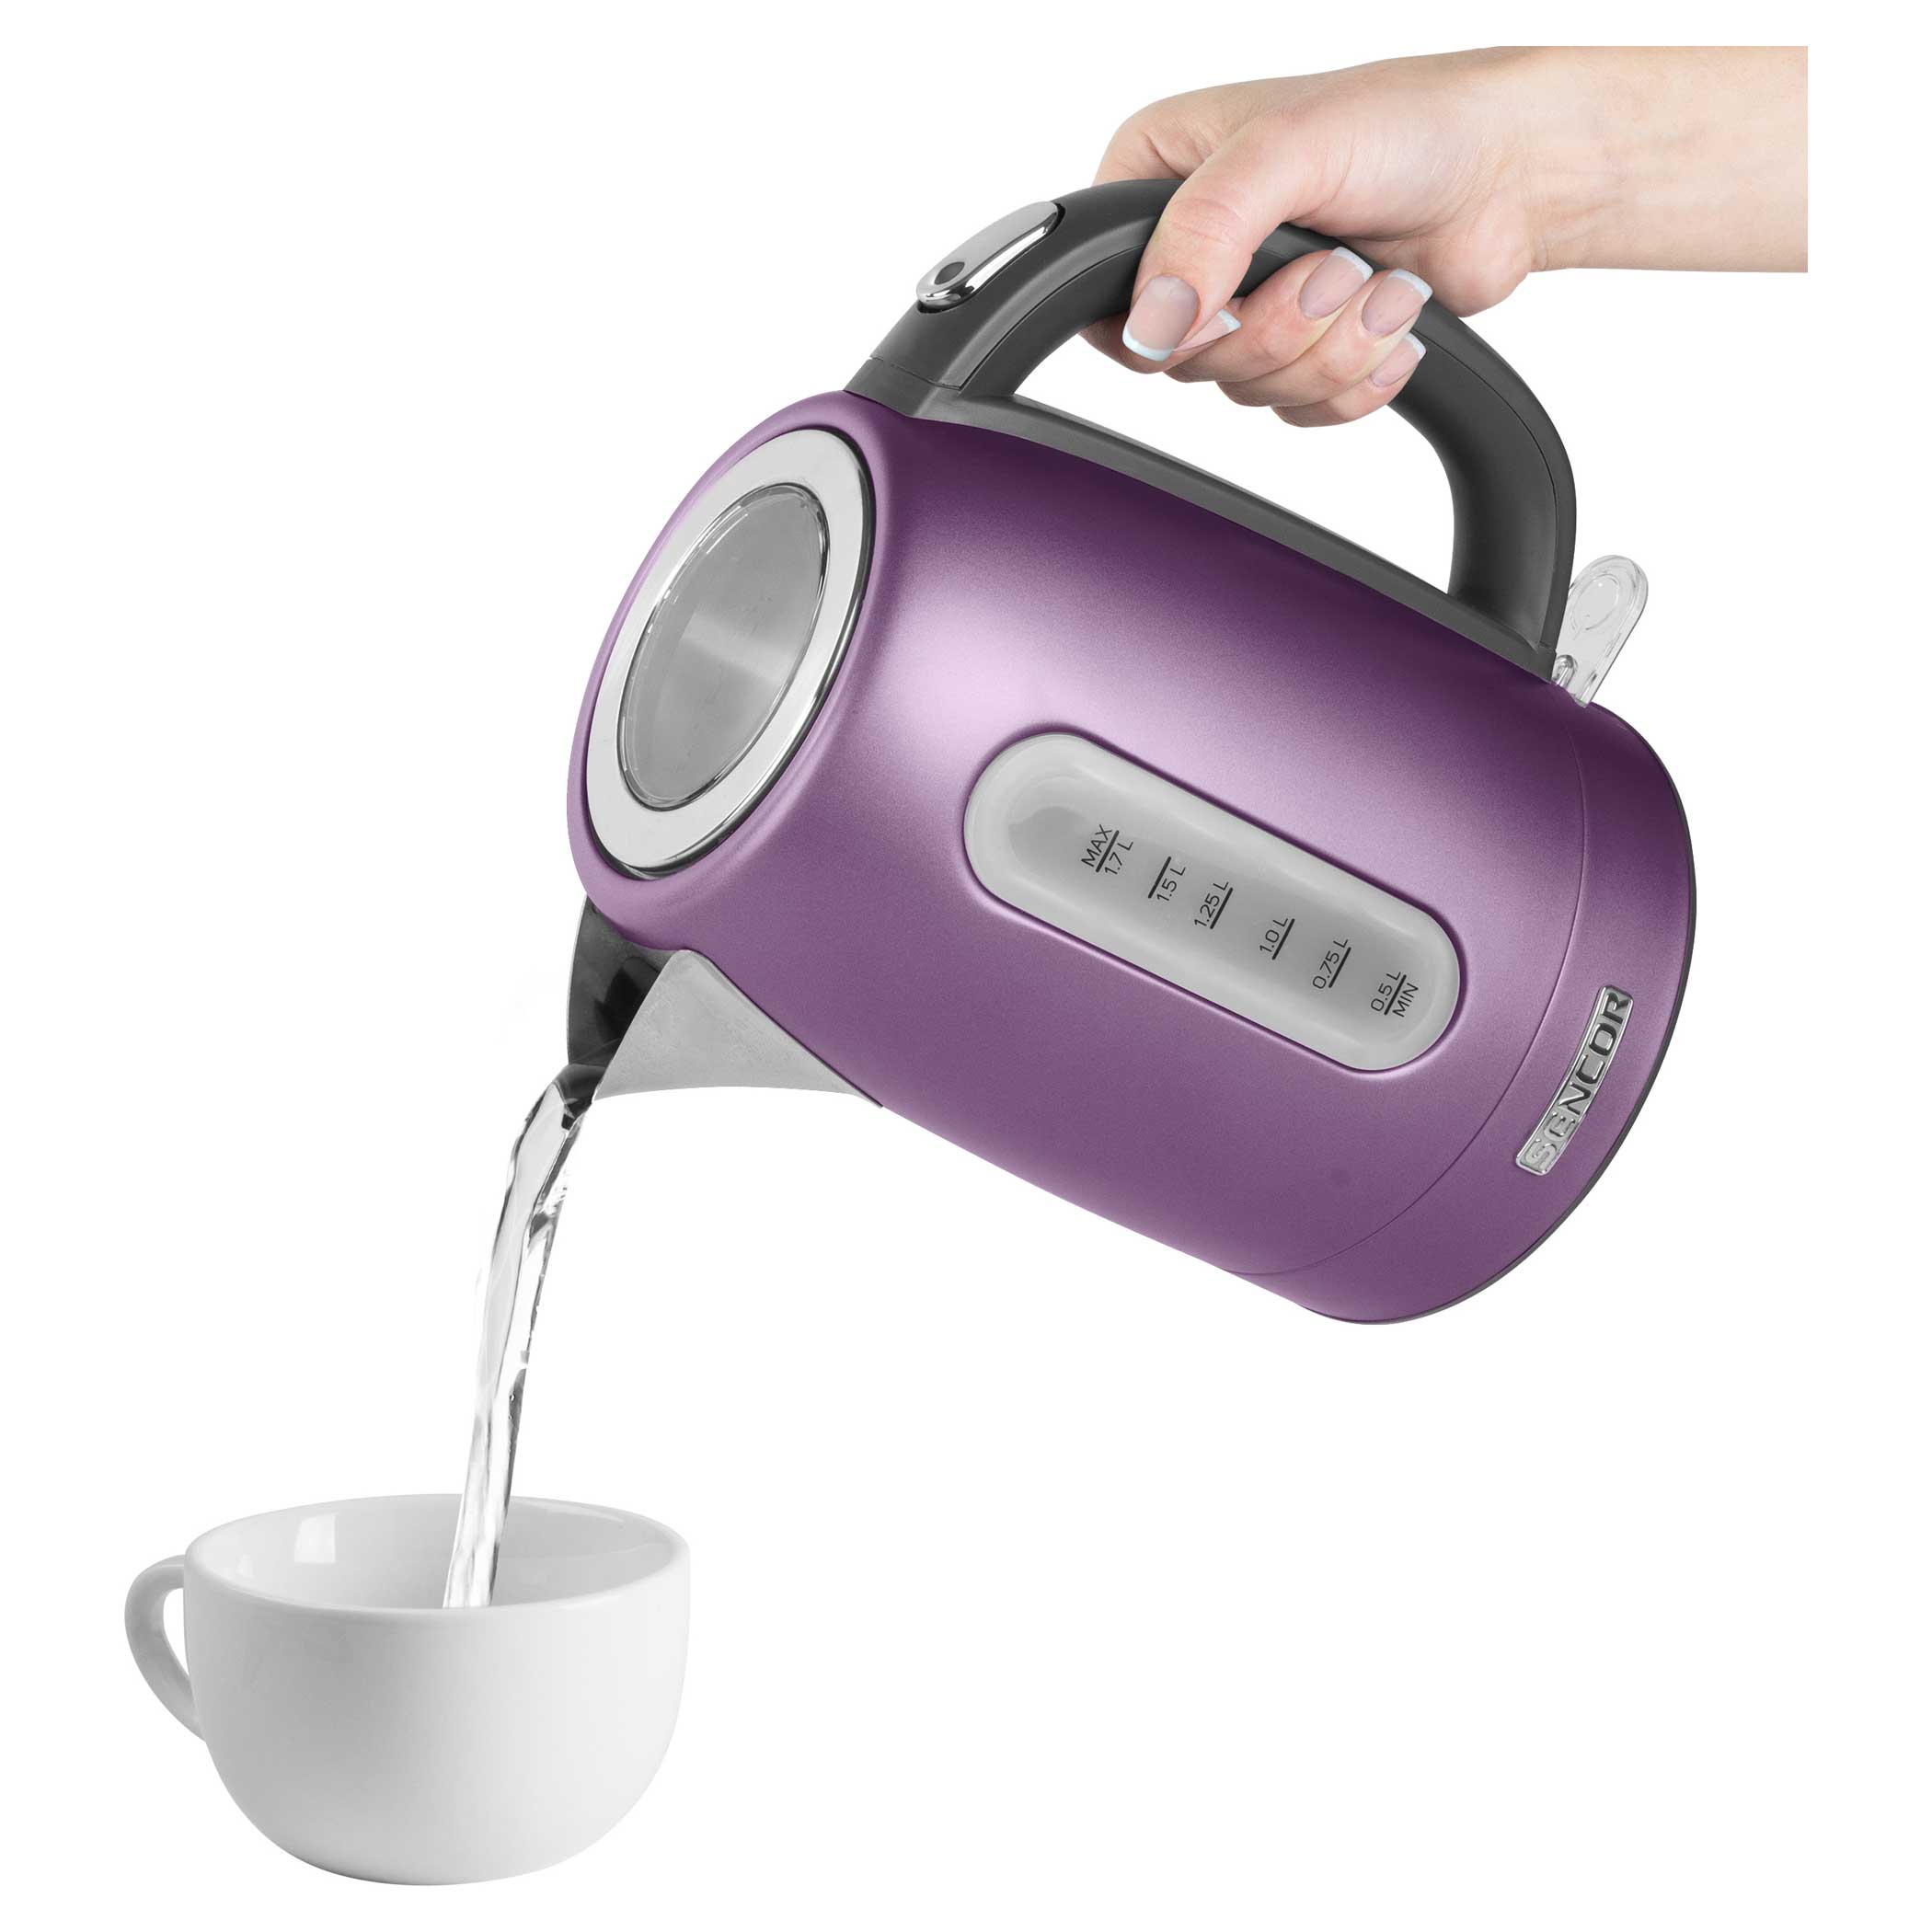 Purple electric kettle stock image. Image of household - 131829051